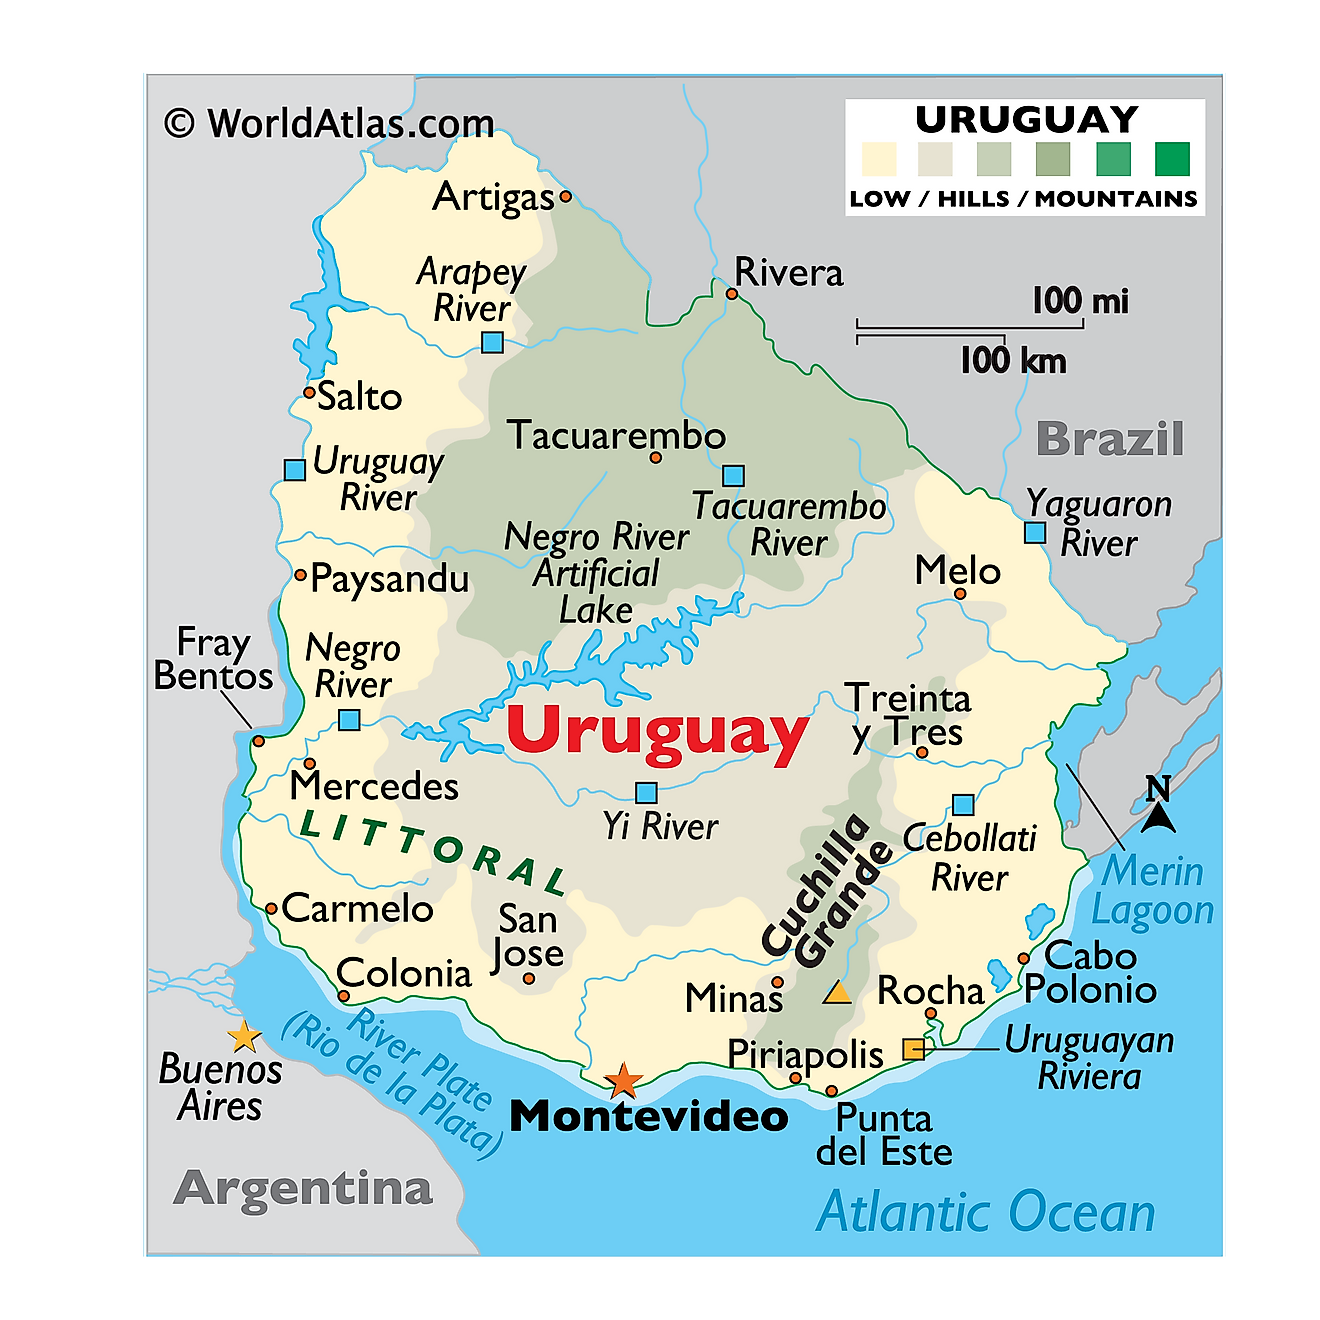 Uruguay Maps and Facts – World Atlas